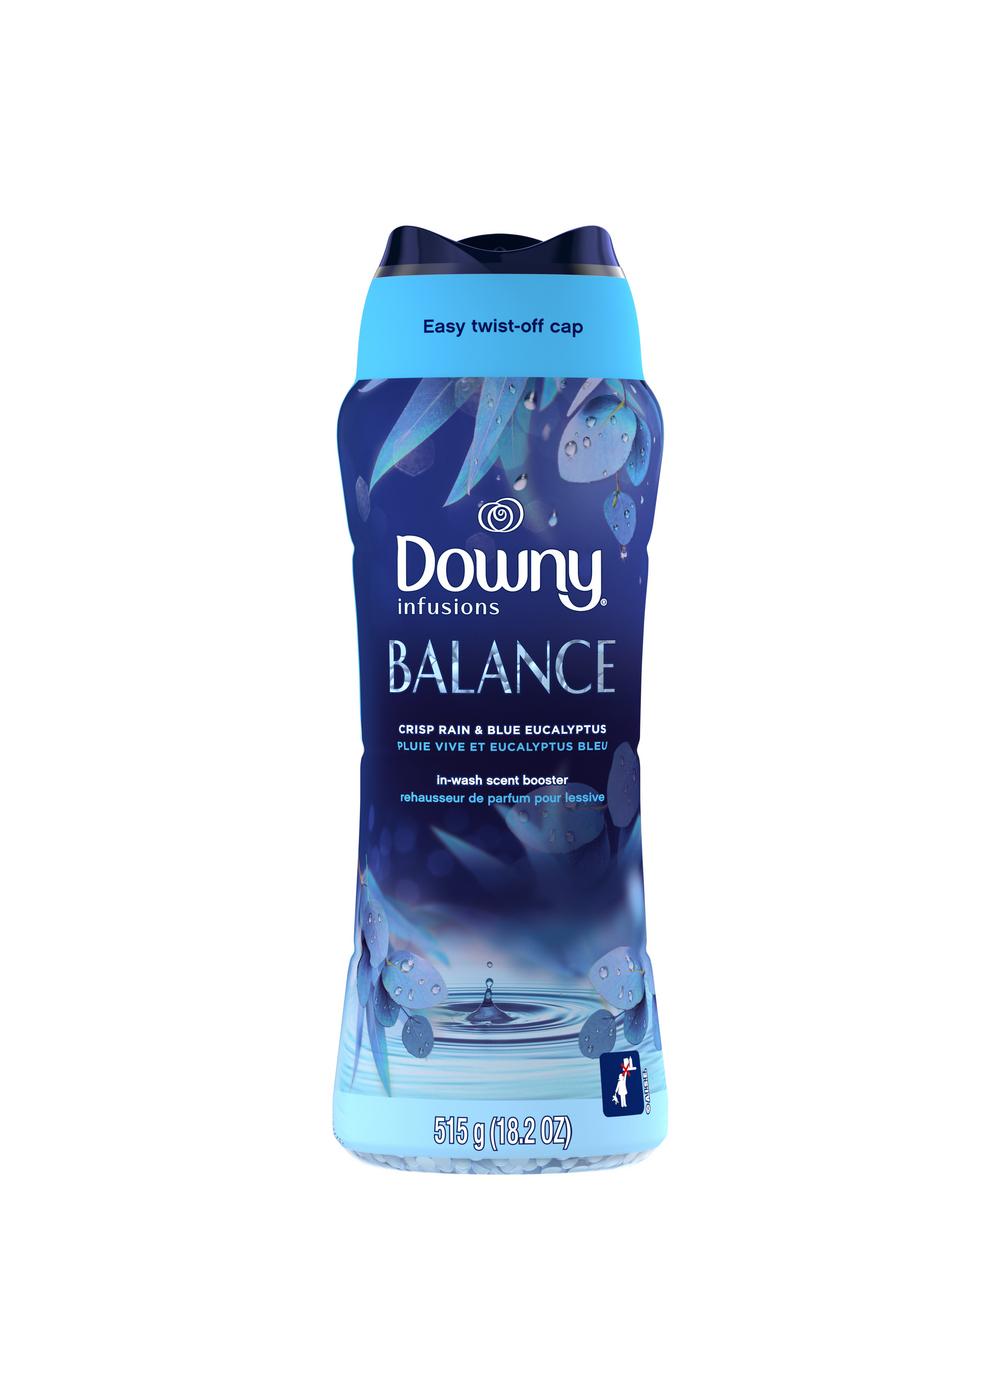 Downy Infusions Balance In-Wash Scent Booster - Crisp Rain & Blue Eucalyptus; image 1 of 2